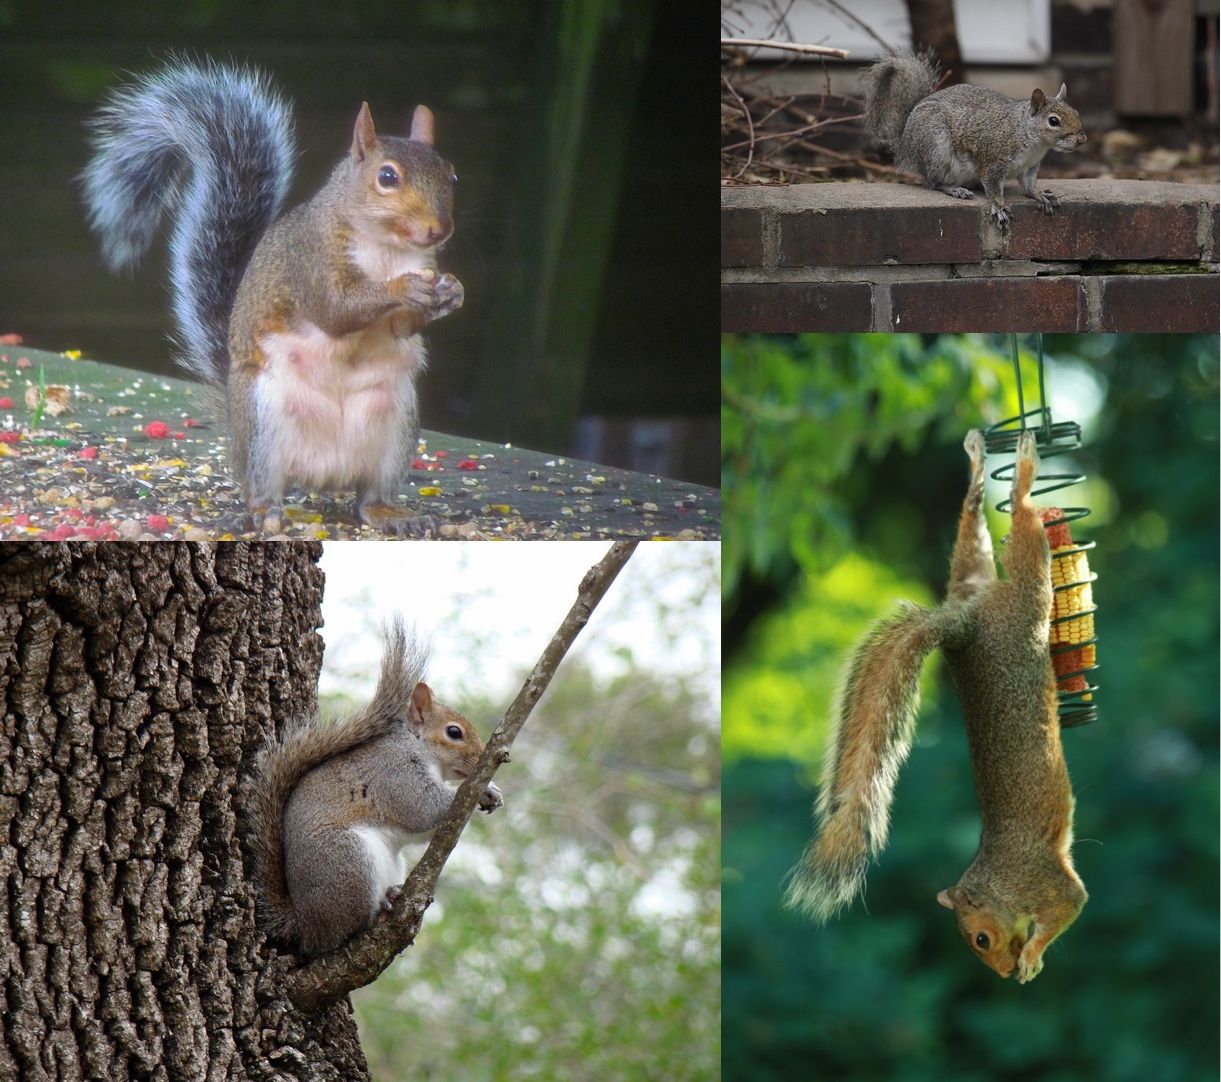 Three images of squirrels returned when querying "backyard squirrels" on DuckDuckGo